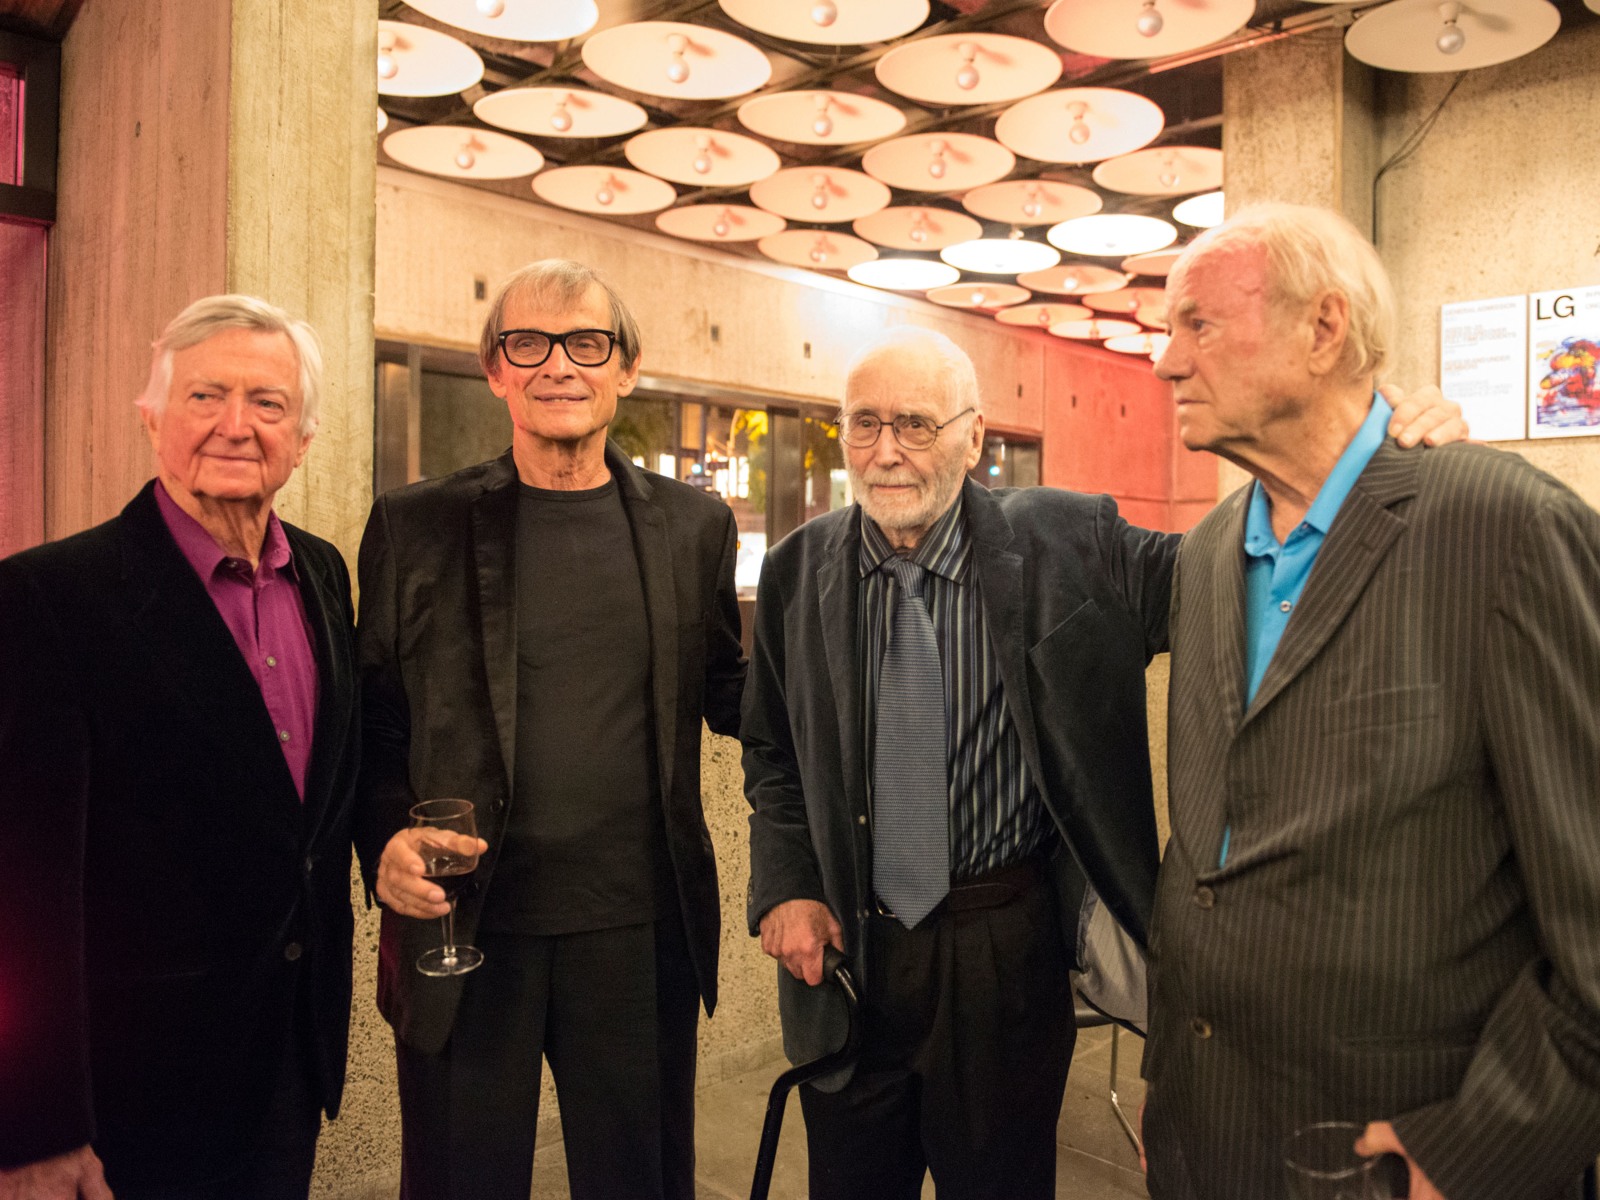 Photographed, from left to right, Jack Youngerman, Charles Hinman, Robert Indiana, and James Rosenquist at the opening of the exhibition Robert Indiana: Beyond LOVE at the Whitney Museum of American Art, New York, September 24, 2013. Photo: Jody Dole